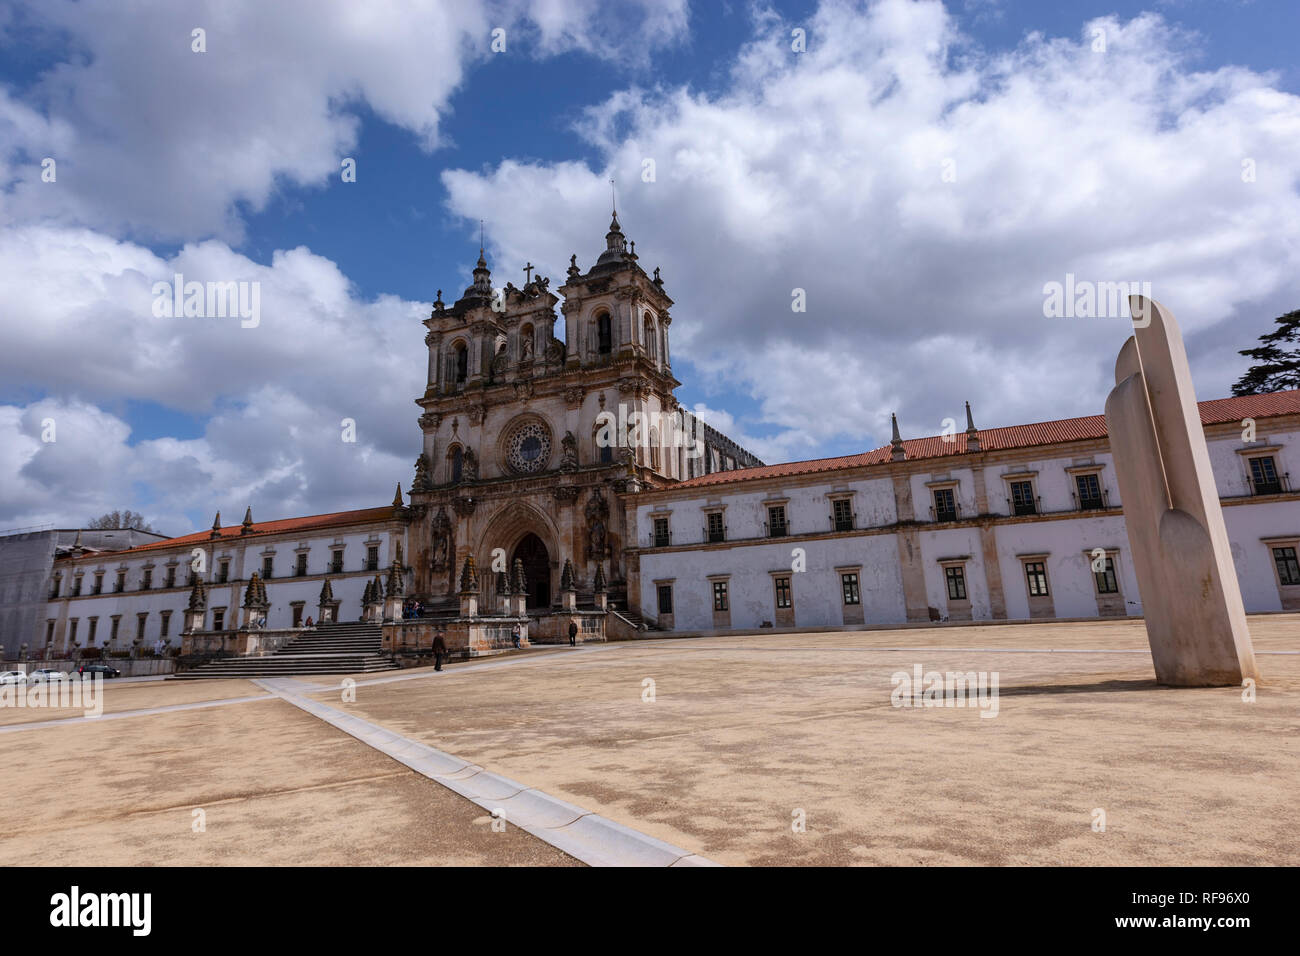 Façade of the Monastery of Alcobaça. The portal and rose window are original gothic, while the towers are baroque. Portugal Stock Photo